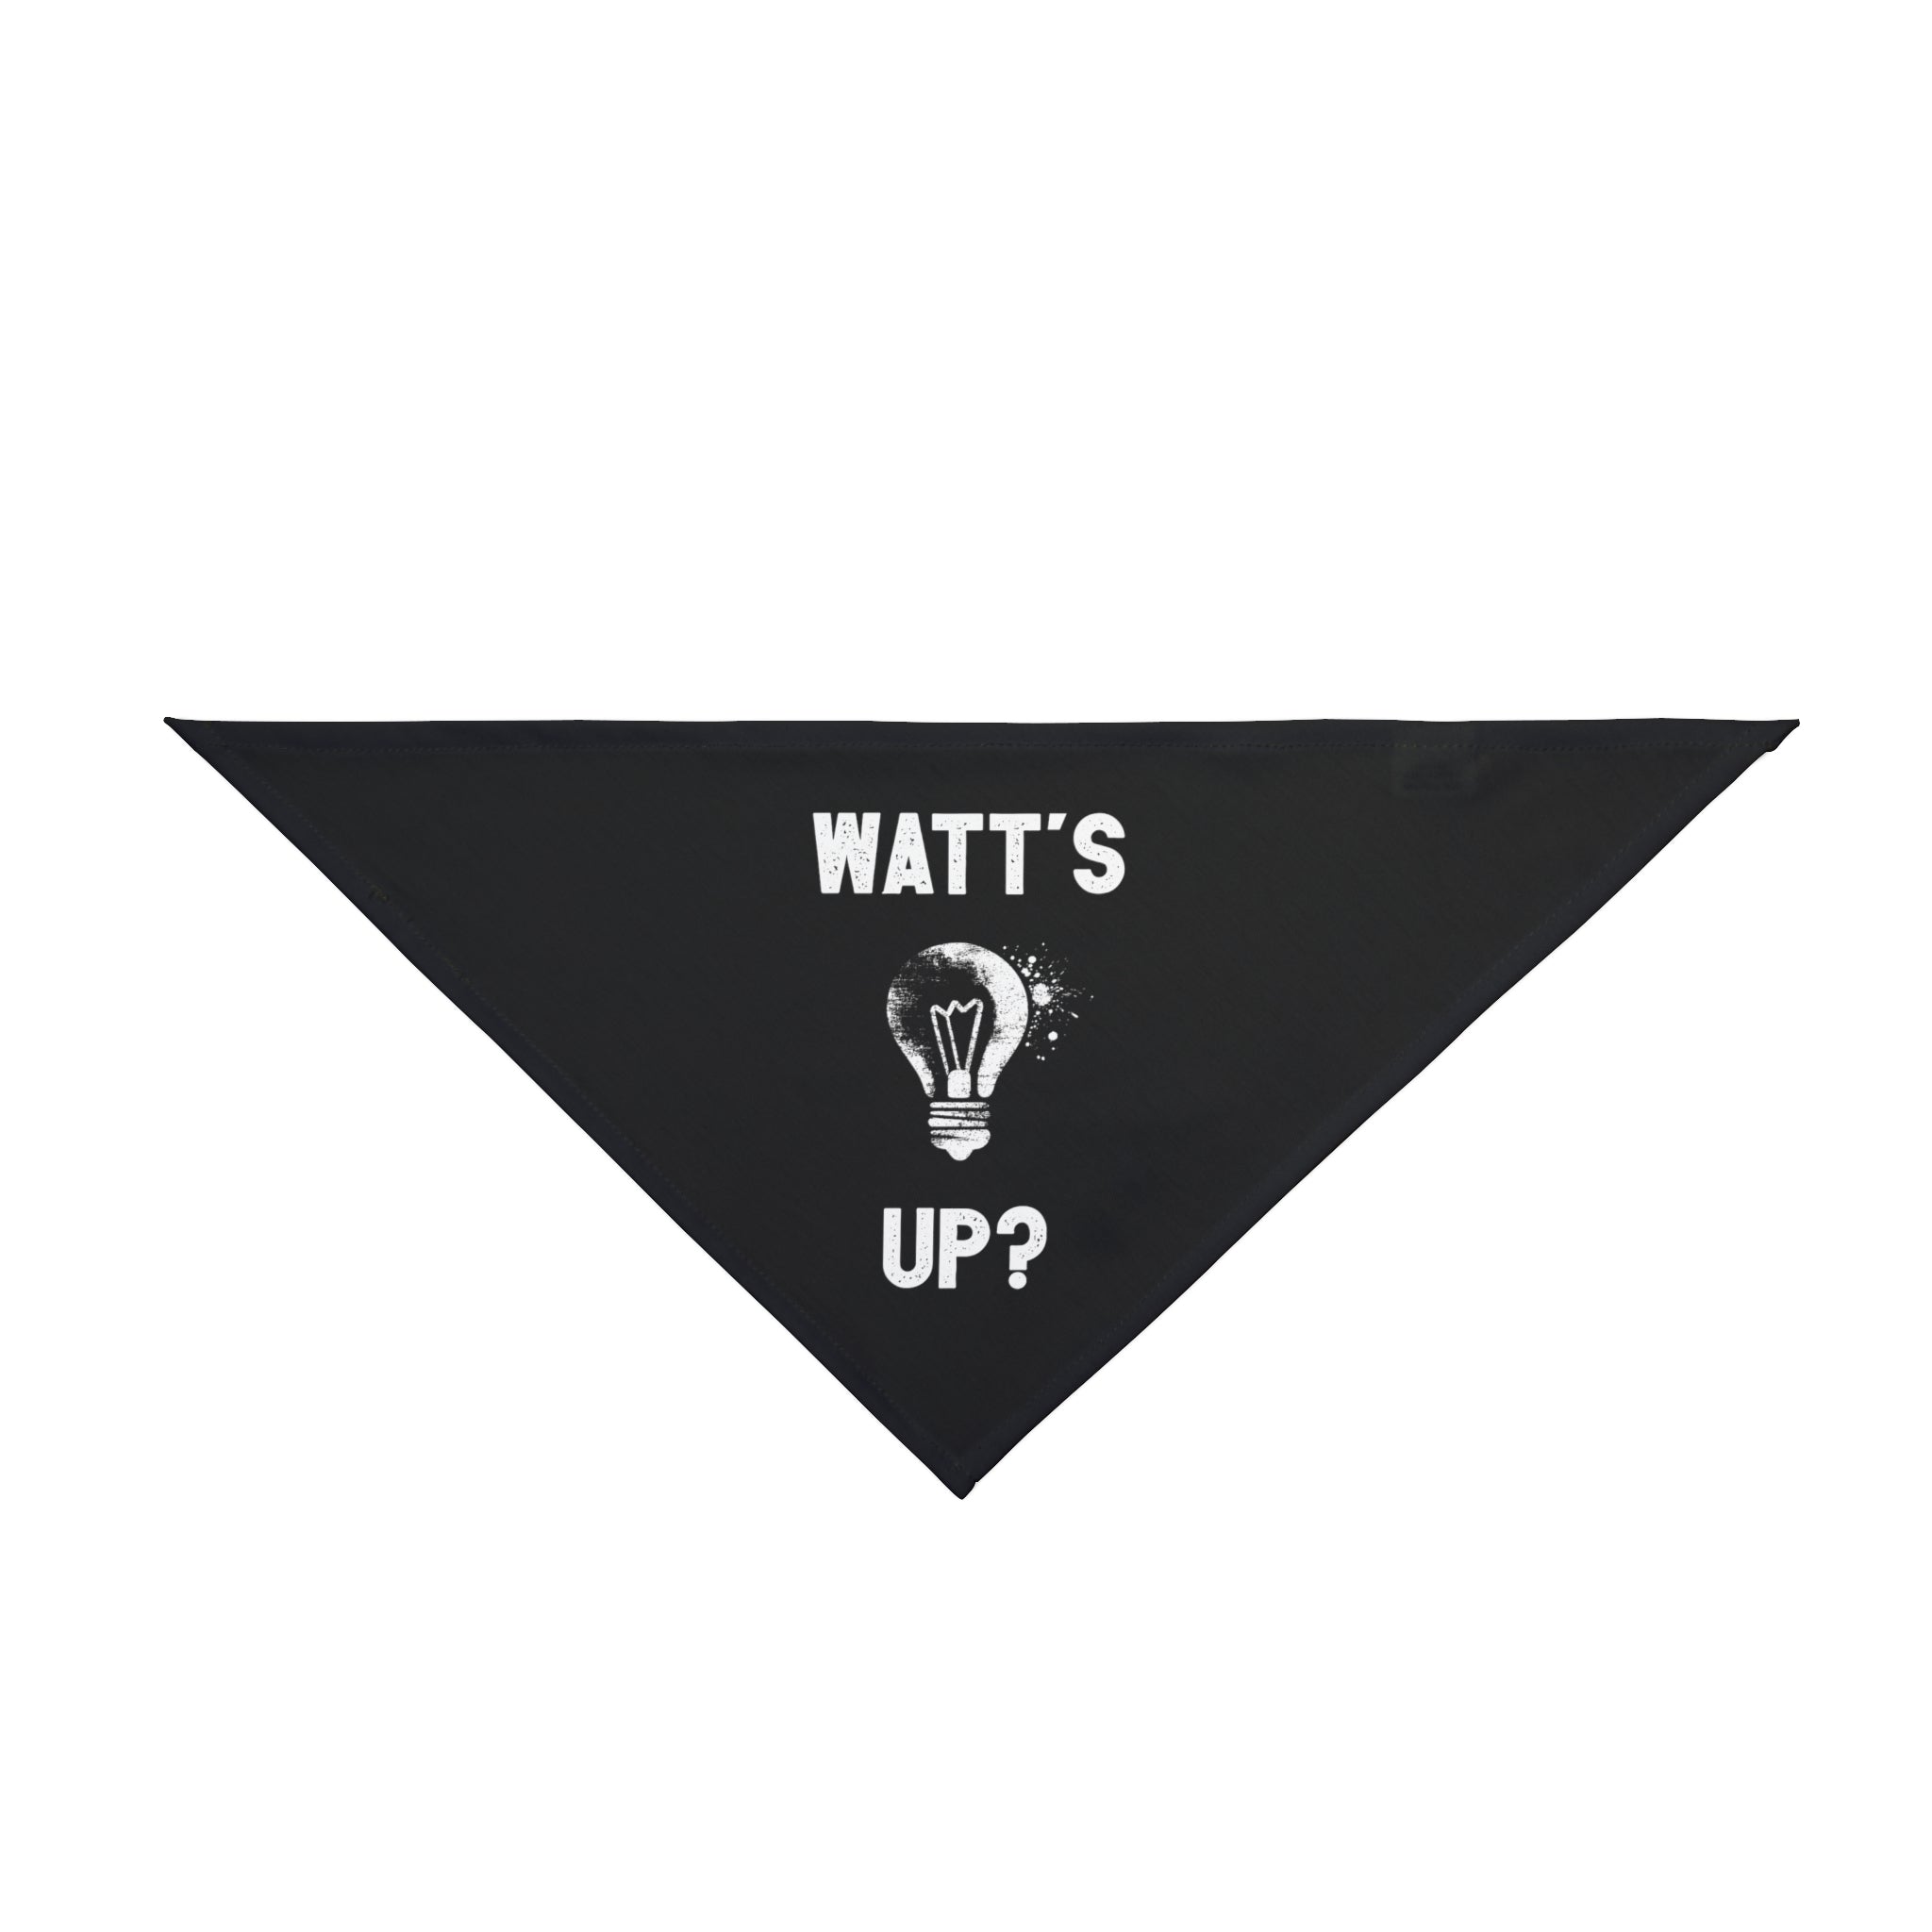 A Watts Up - Pet Bandana with the phrase "Watt's Up?" and an image of a light bulb printed in white on spun polyester.